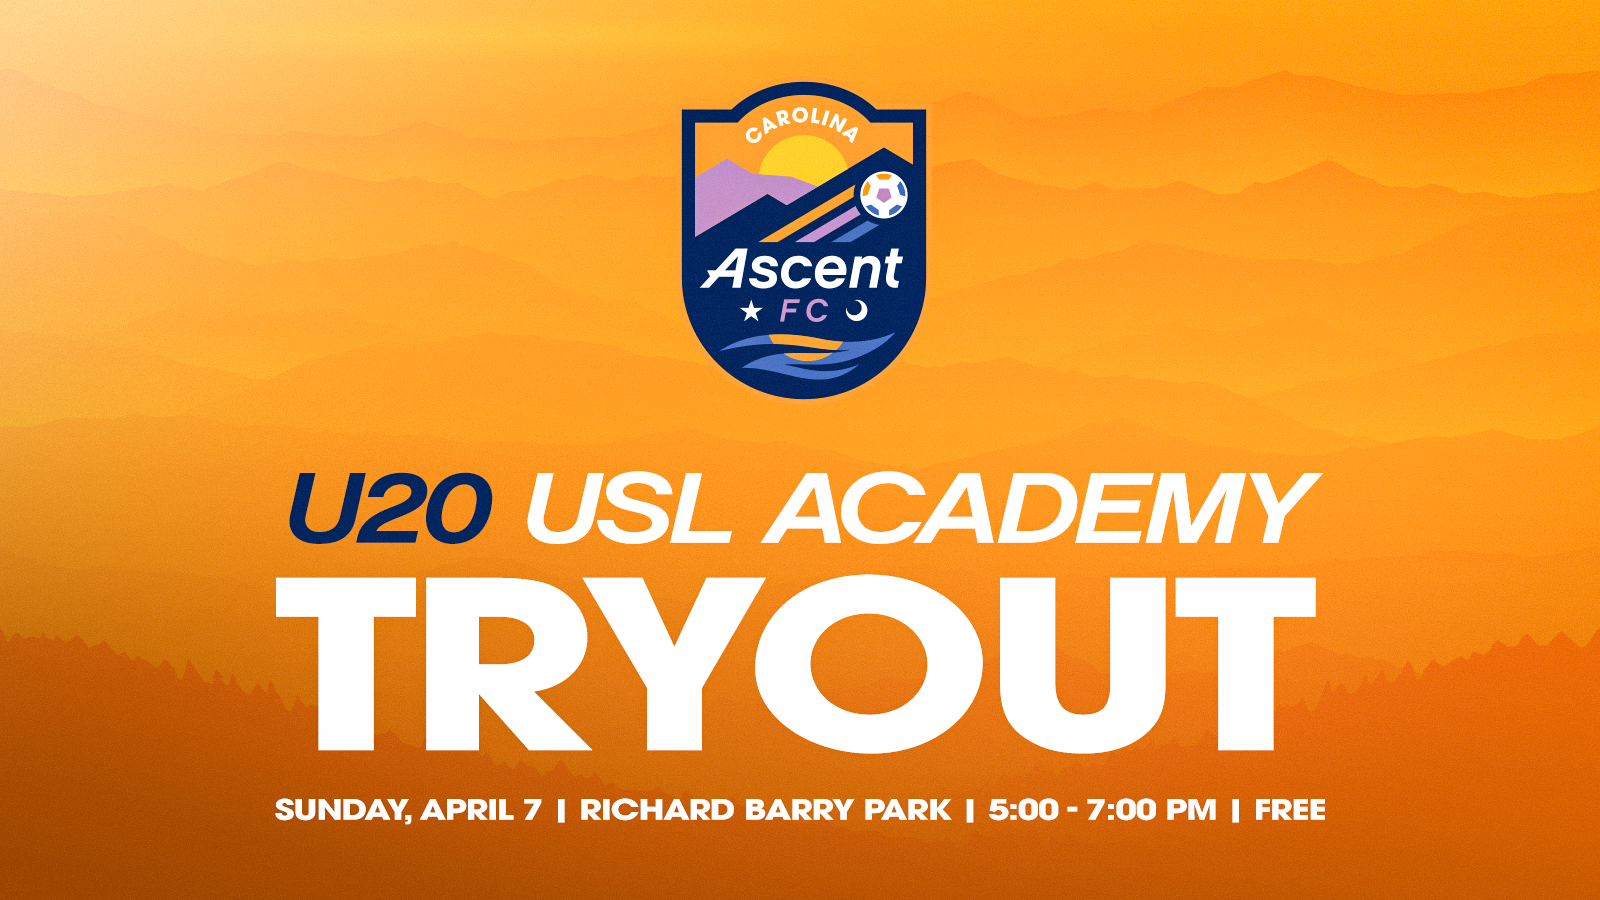 Carolina Ascent to Host U20 USL Academy Tryout this Sunday, April 7 featured image